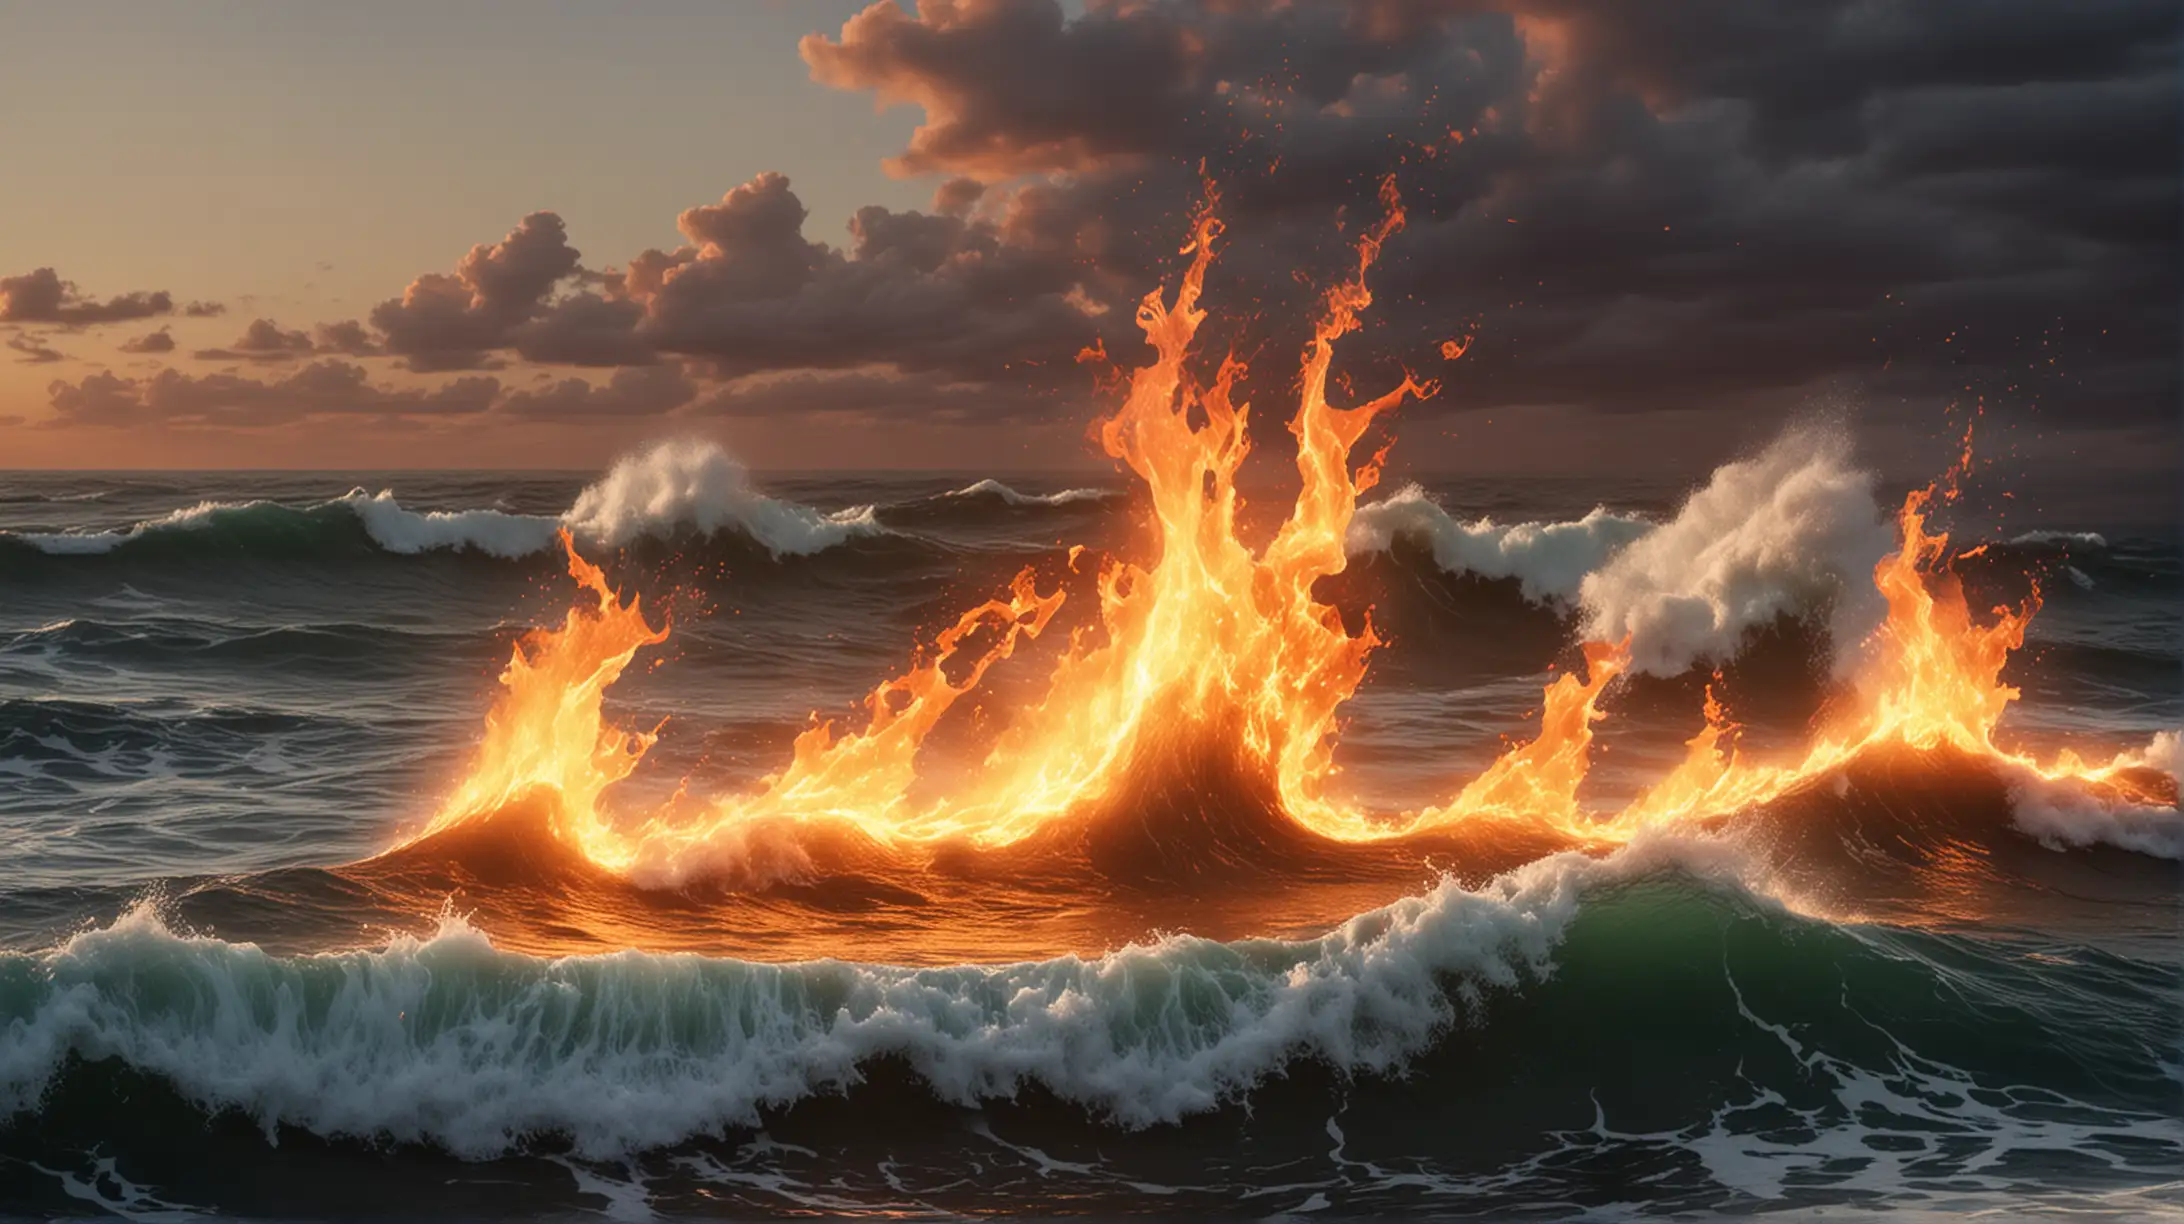 Fiery Waves Illustration of an Ocean with Flames